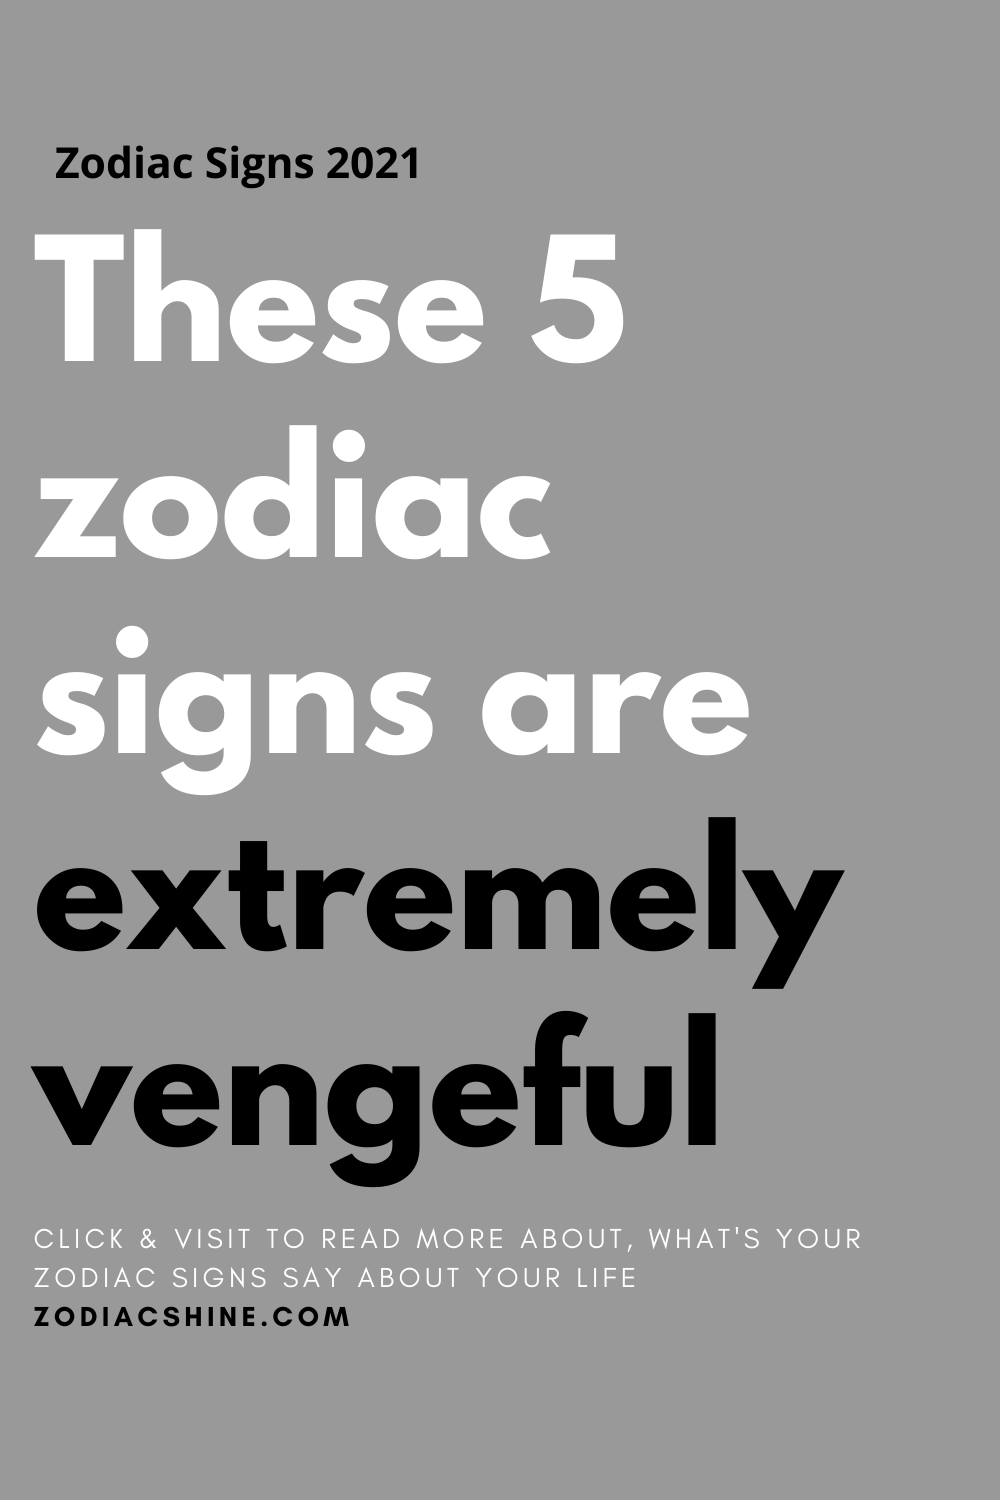 These 5 zodiac signs are extremely vengeful